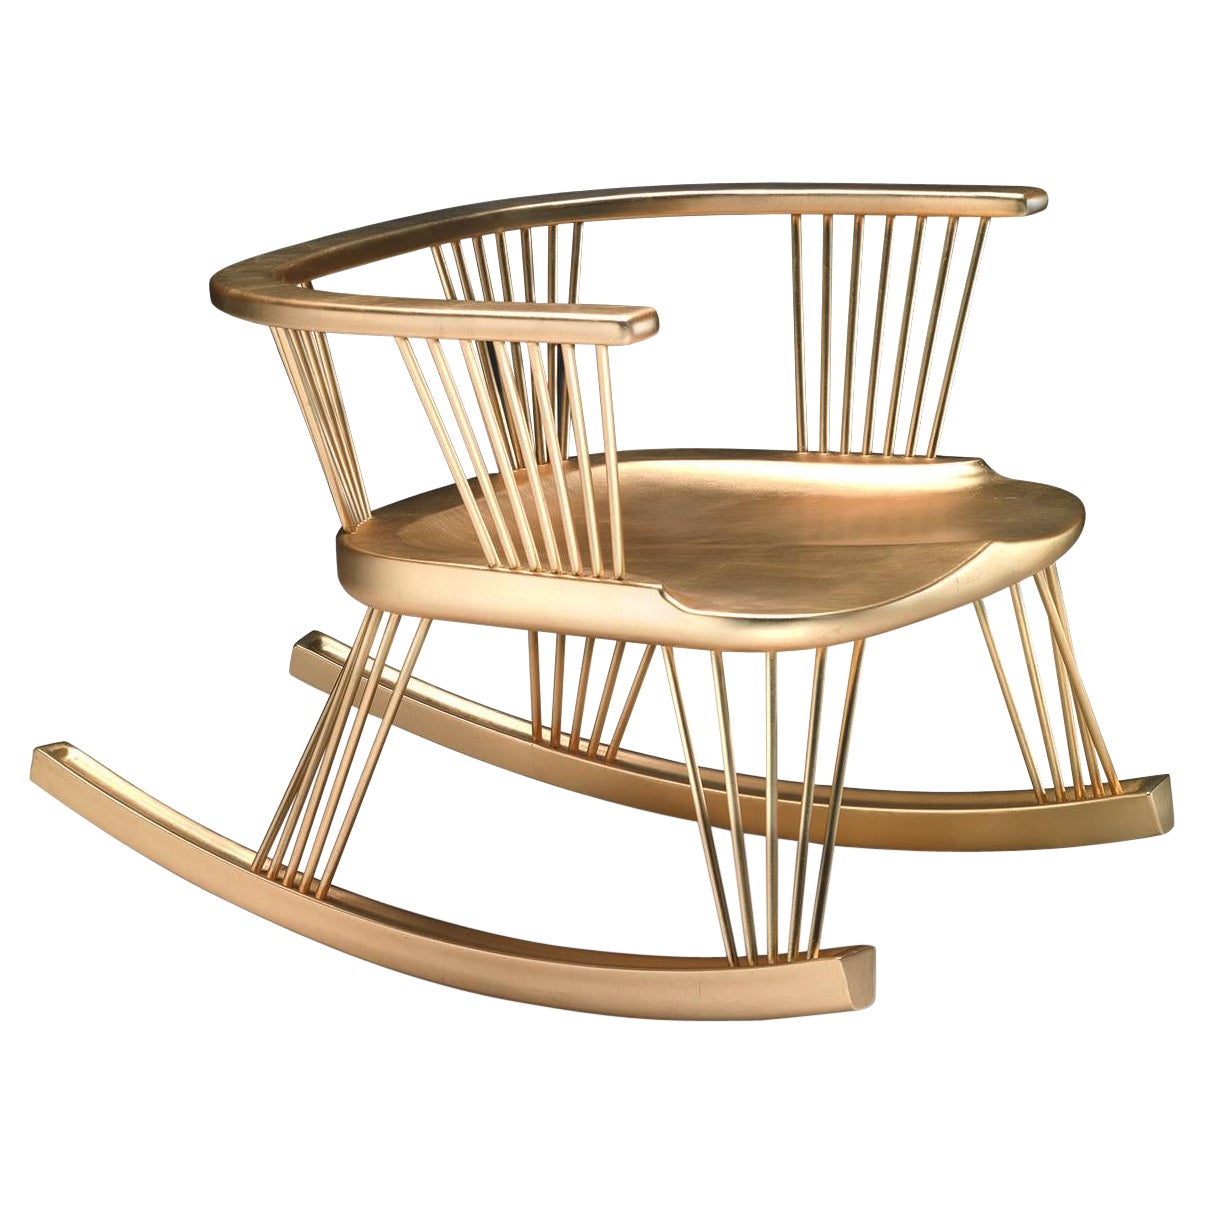 SITLALI Low Rocking Chair in Solid Wood and Thin Overlapping Road and Gold Leaf